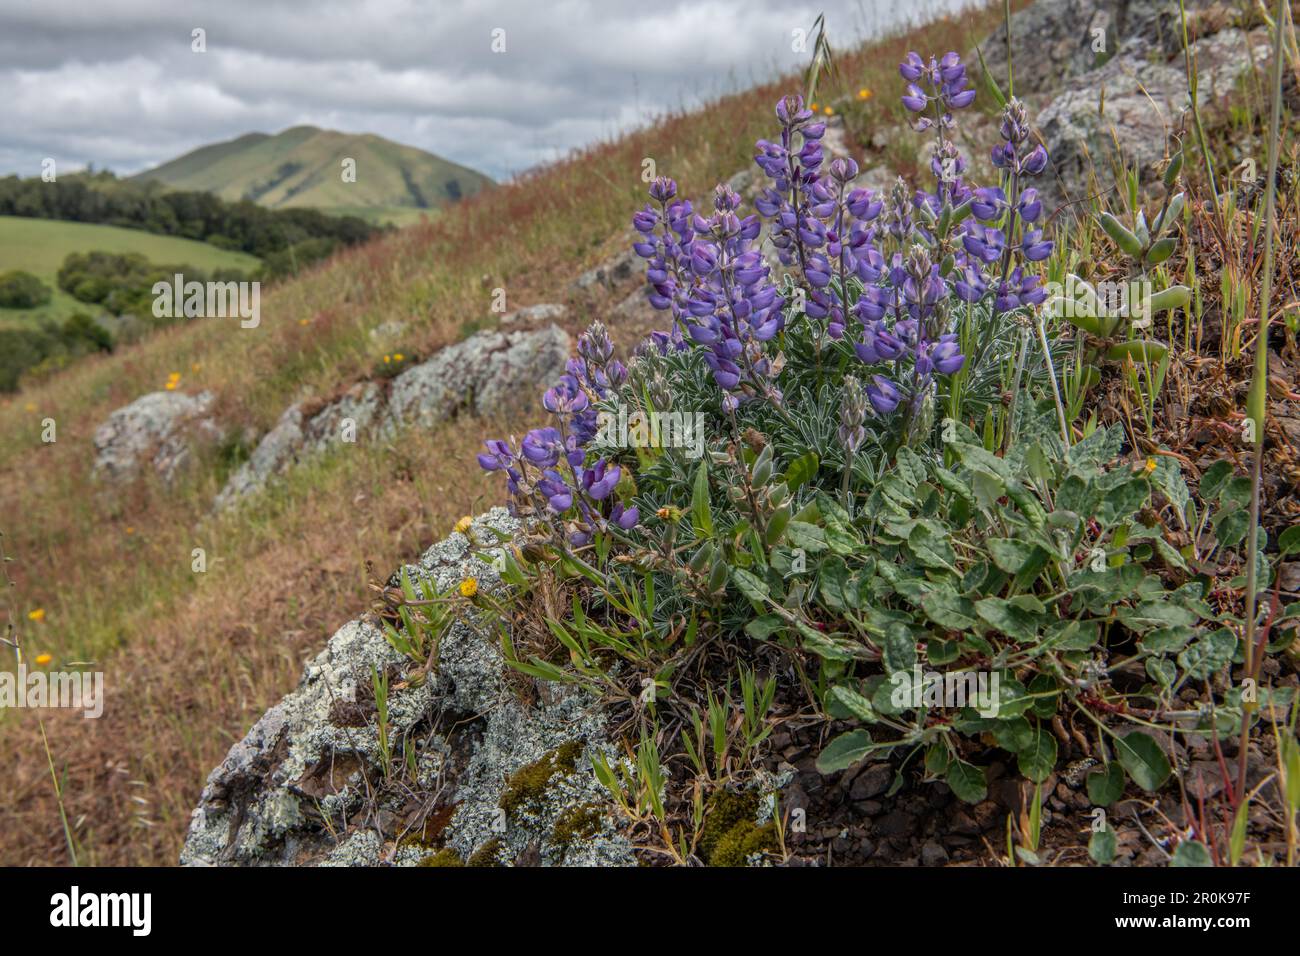 Beautiful wild flowers, Lupinus nanus known as sky or dwarf lupine, blooming on a California hillside in Marin county. Stock Photo